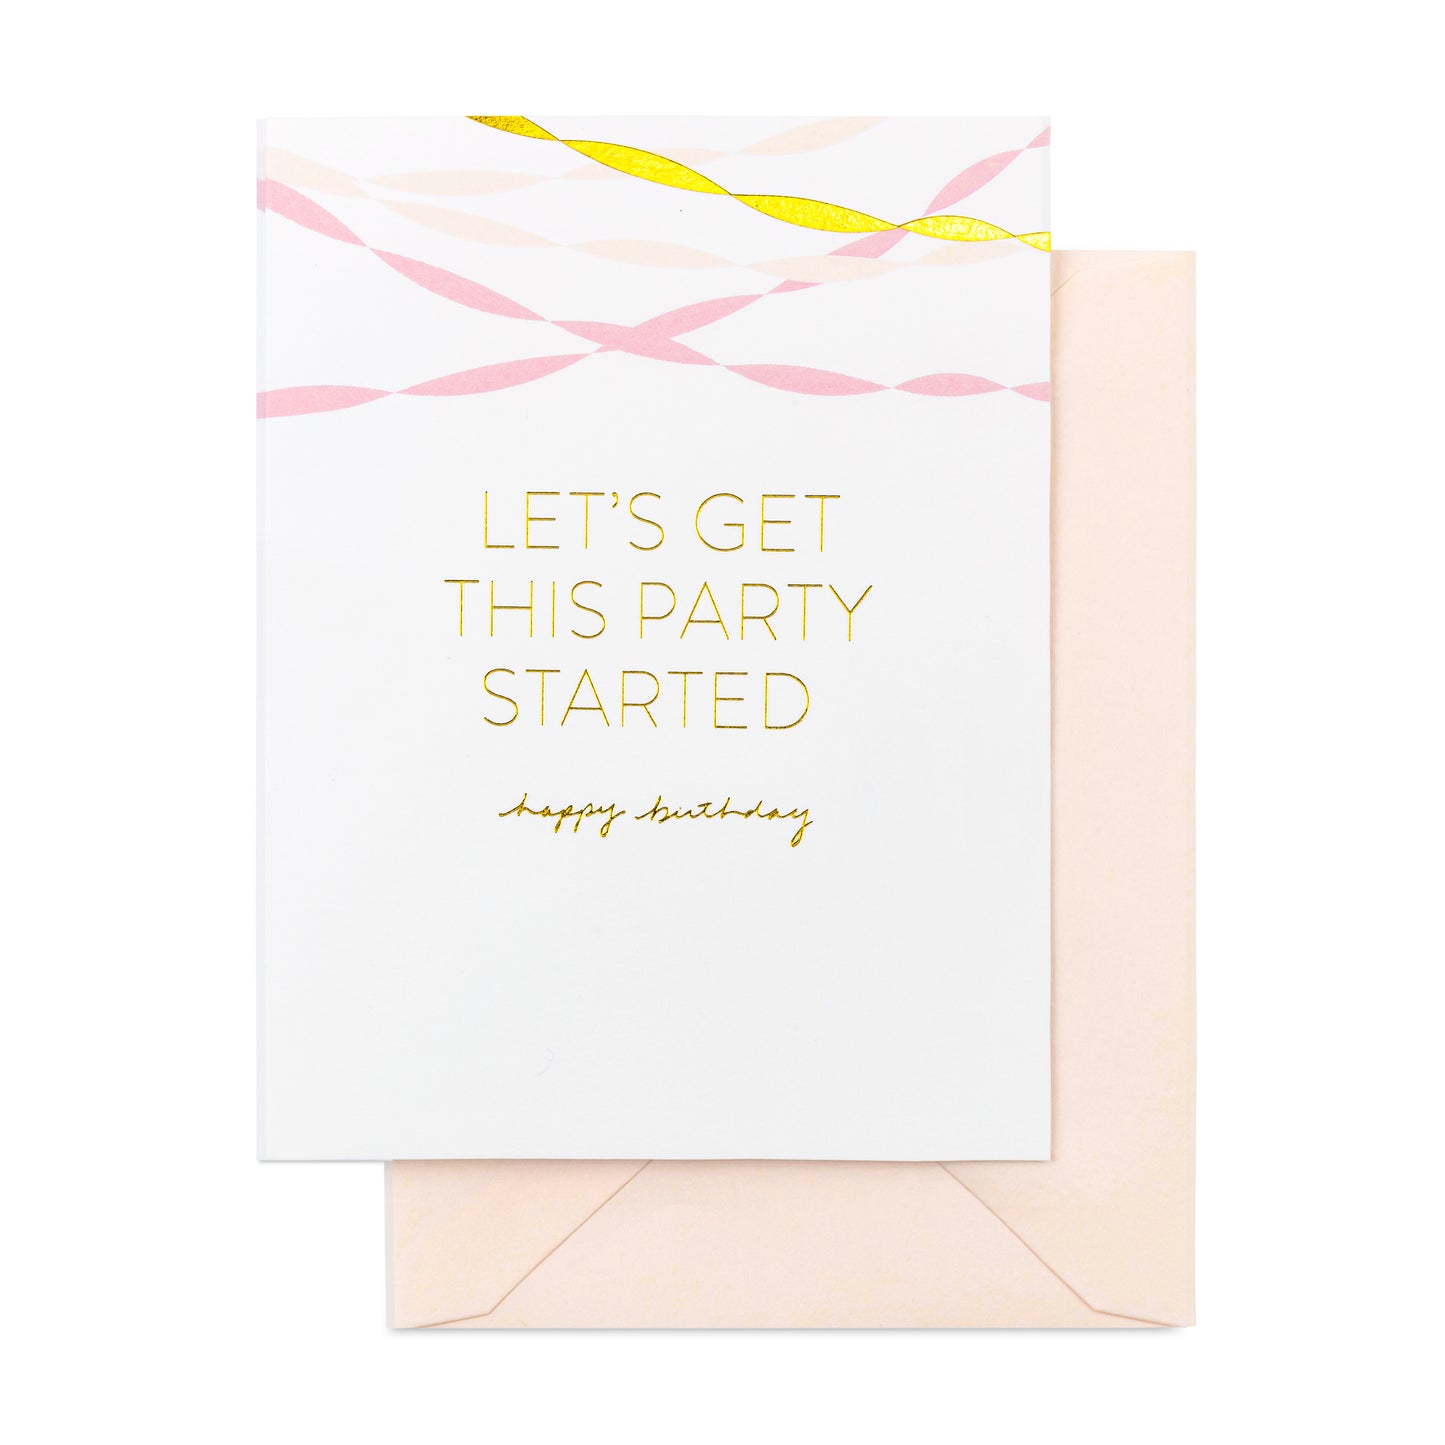 Pink and gold streamer birthday card printed with Let's Get This Party Started